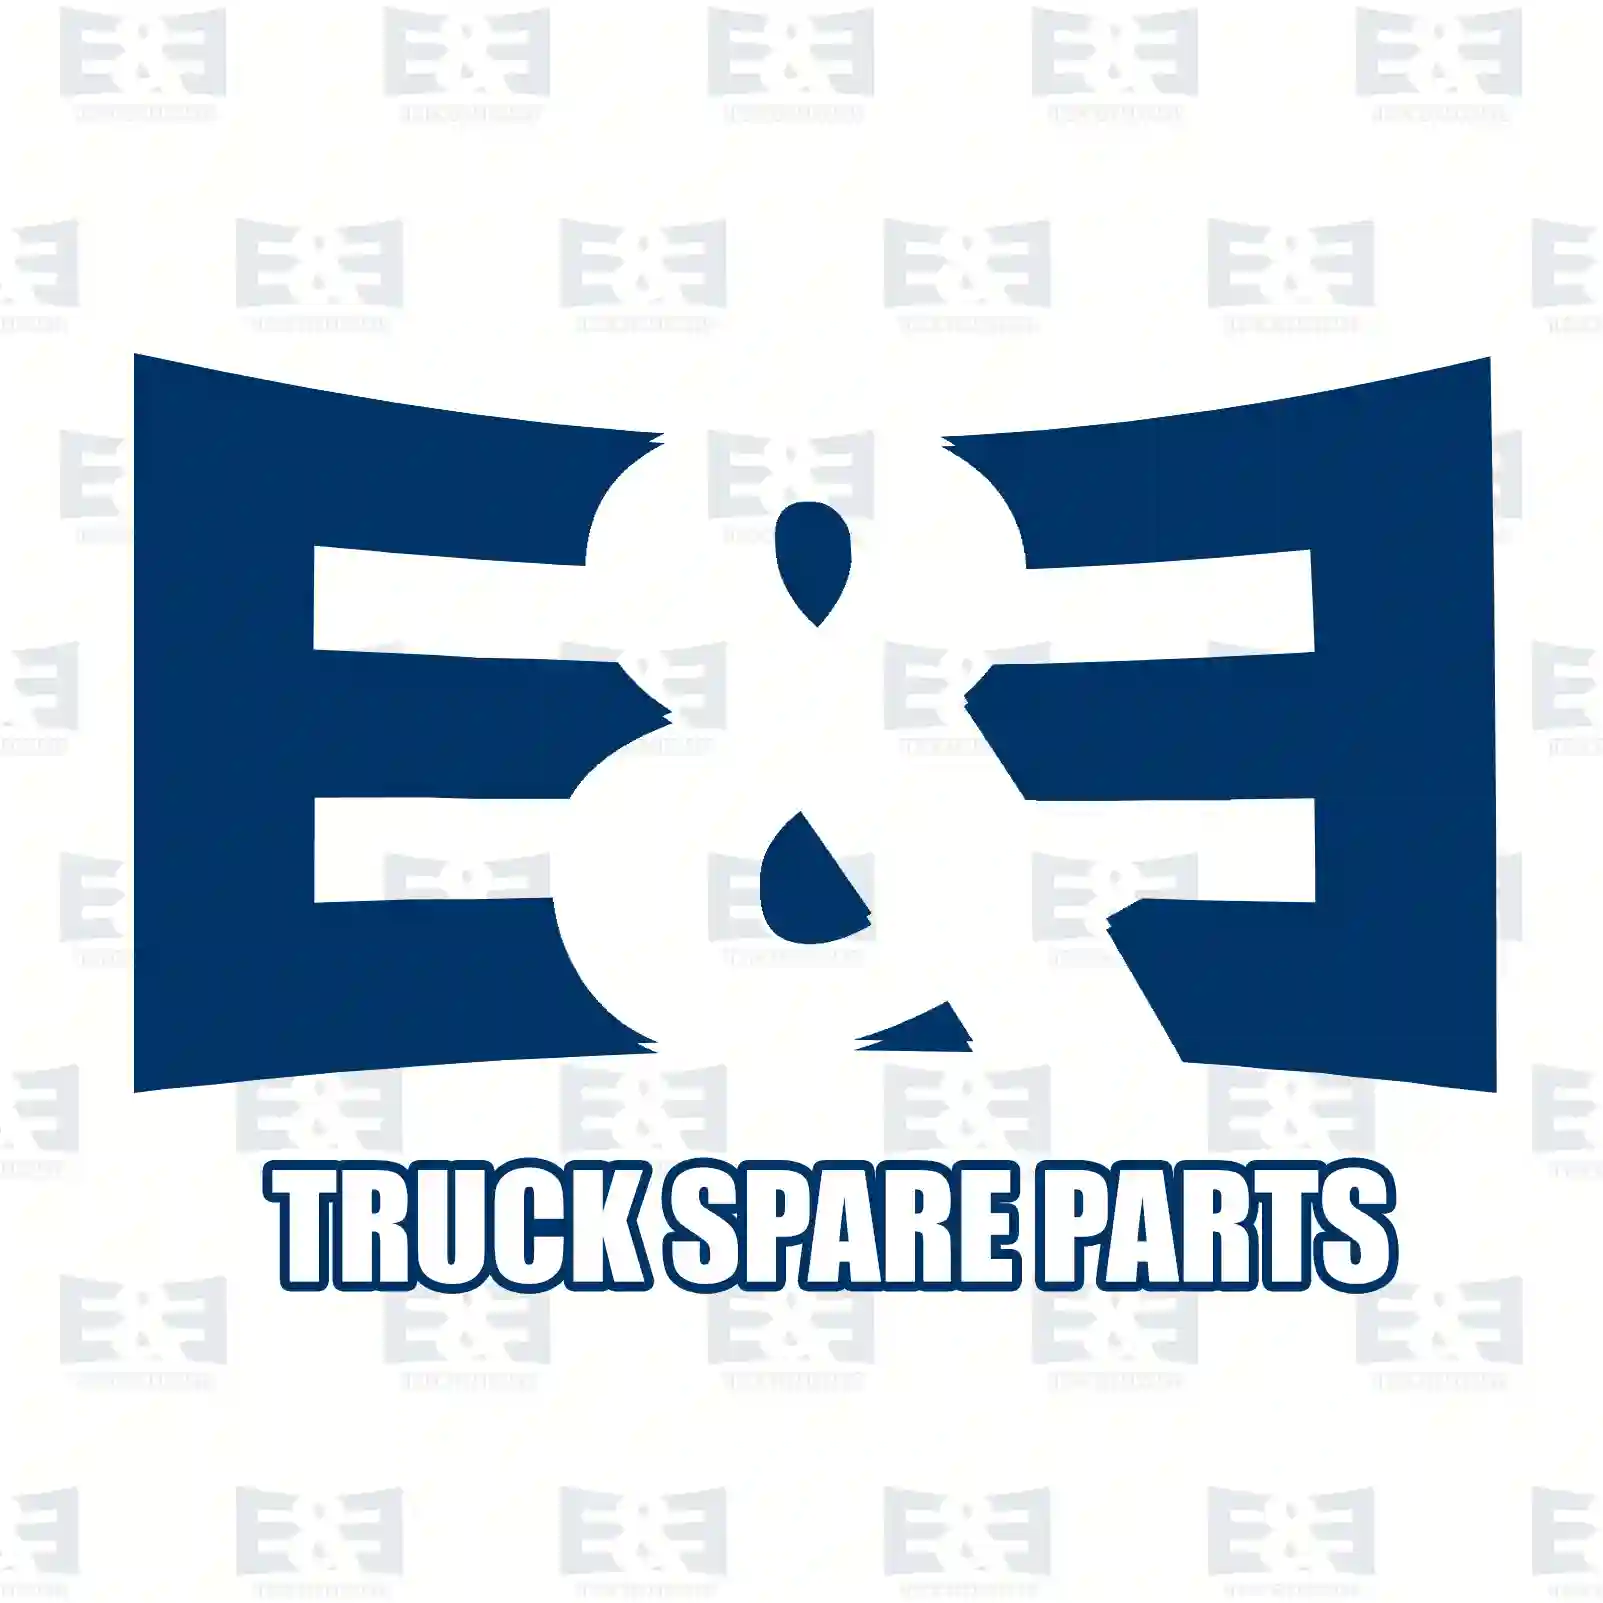  Hollow screw fitting || E&E Truck Spare Parts | Truck Spare Parts, Auotomotive Spare Parts